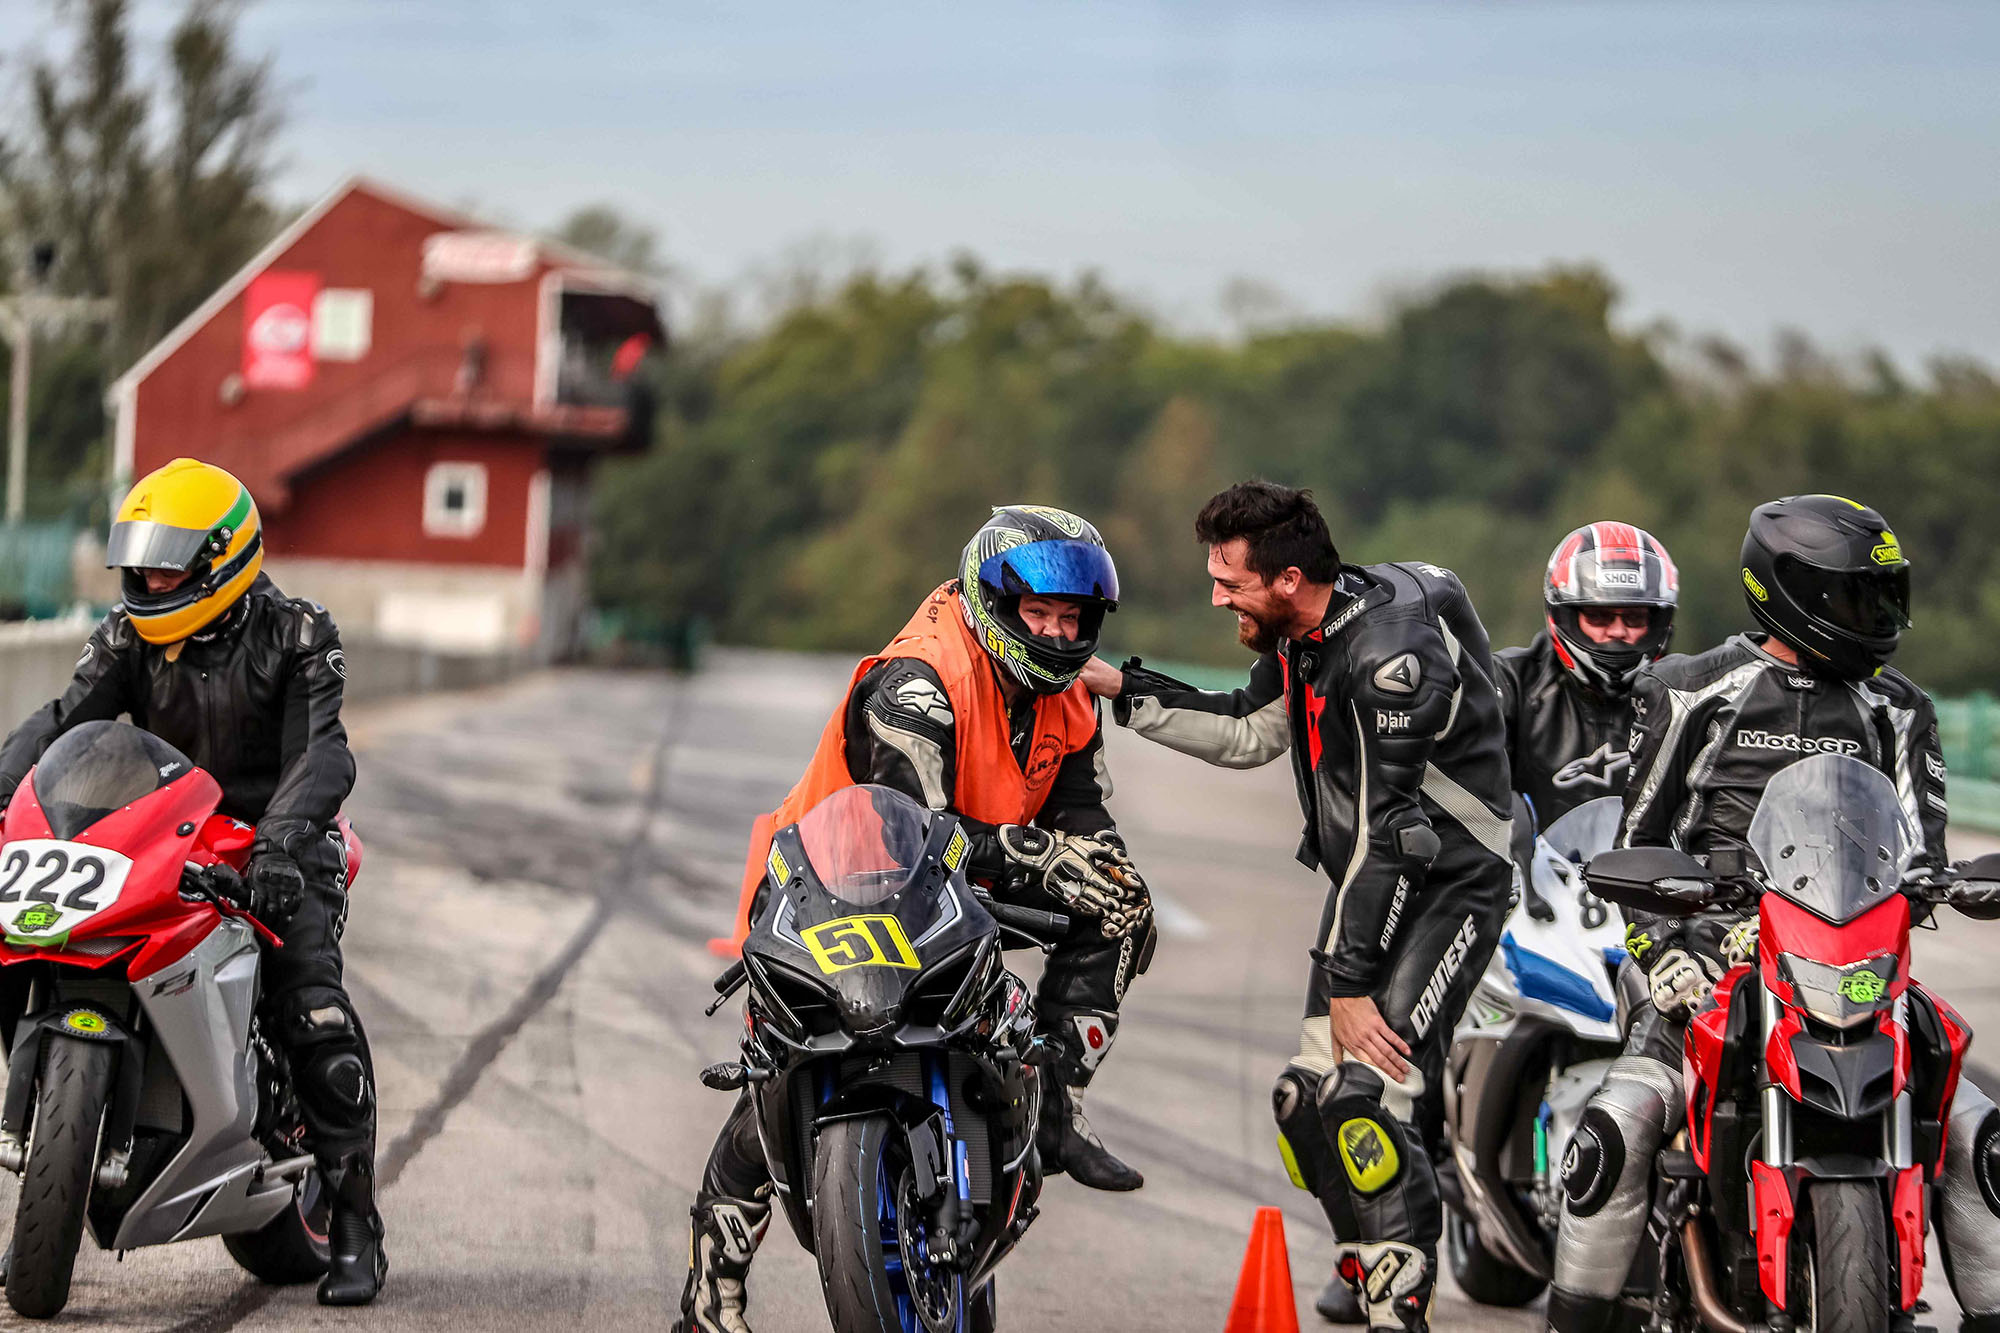 Small groups, maximum track time, competitive pricing